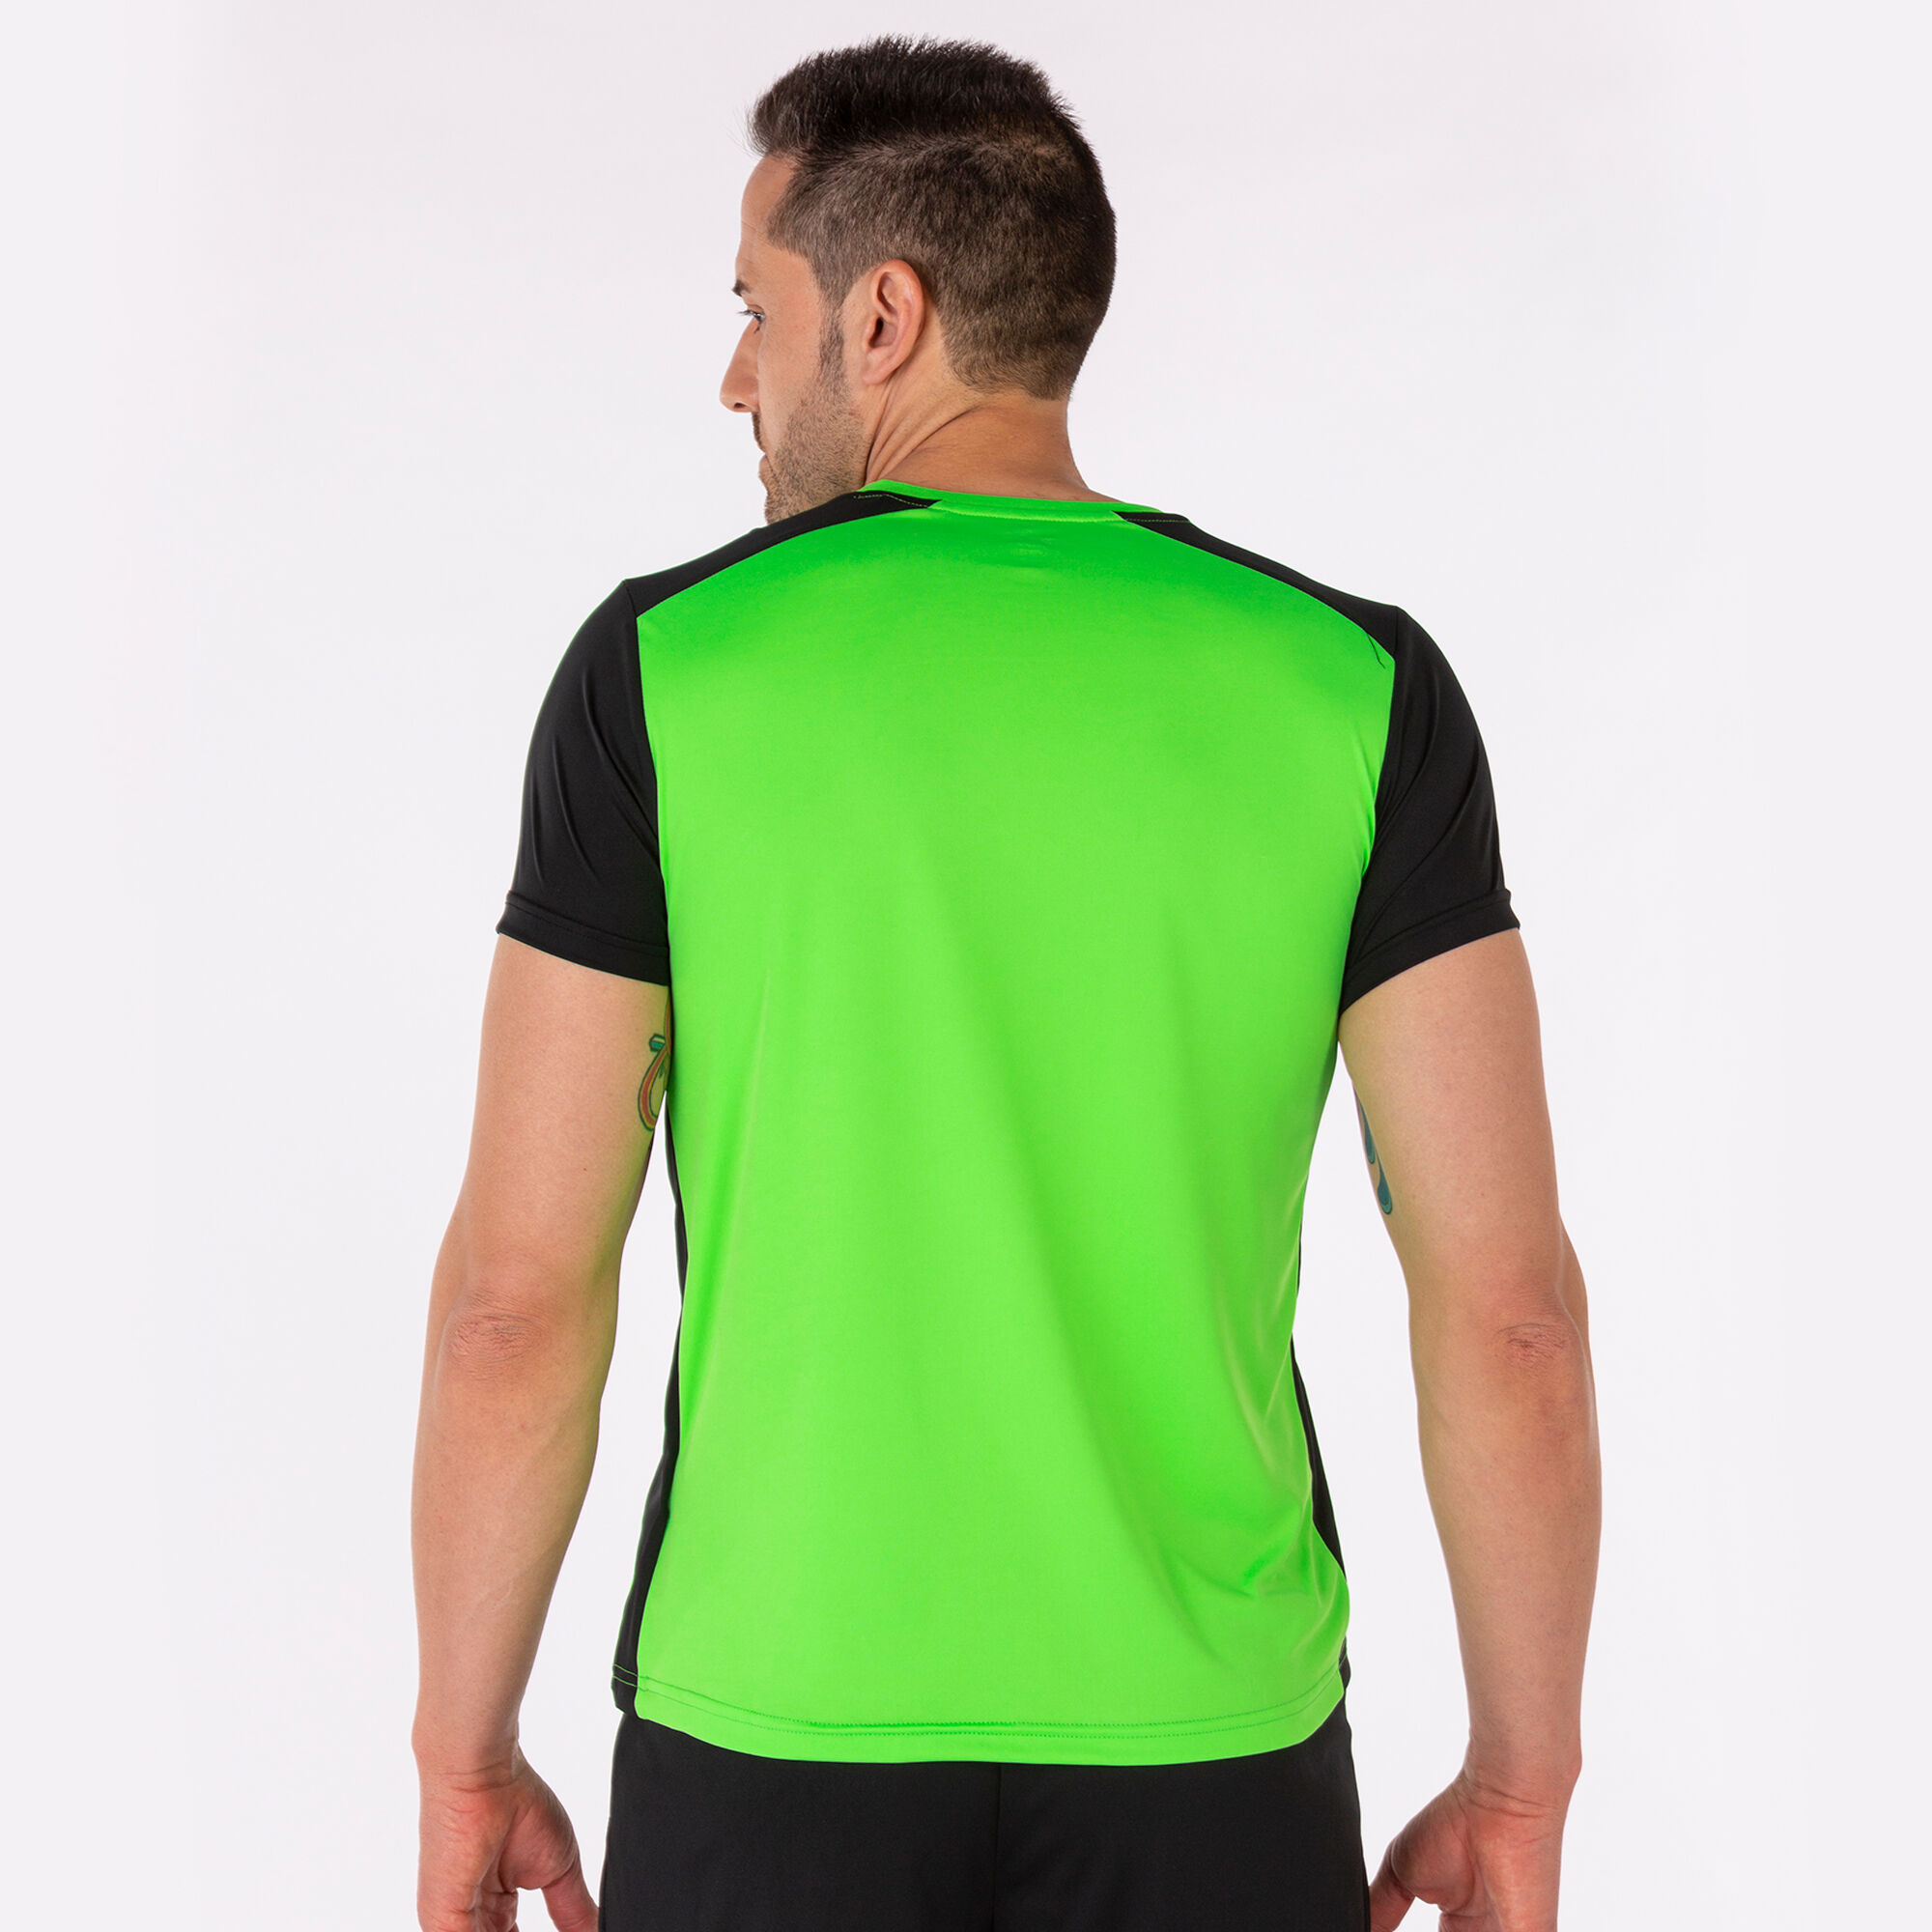 MAILLOT MANCHES COURTES HOMME RECORD II VERT FLUO NOIR